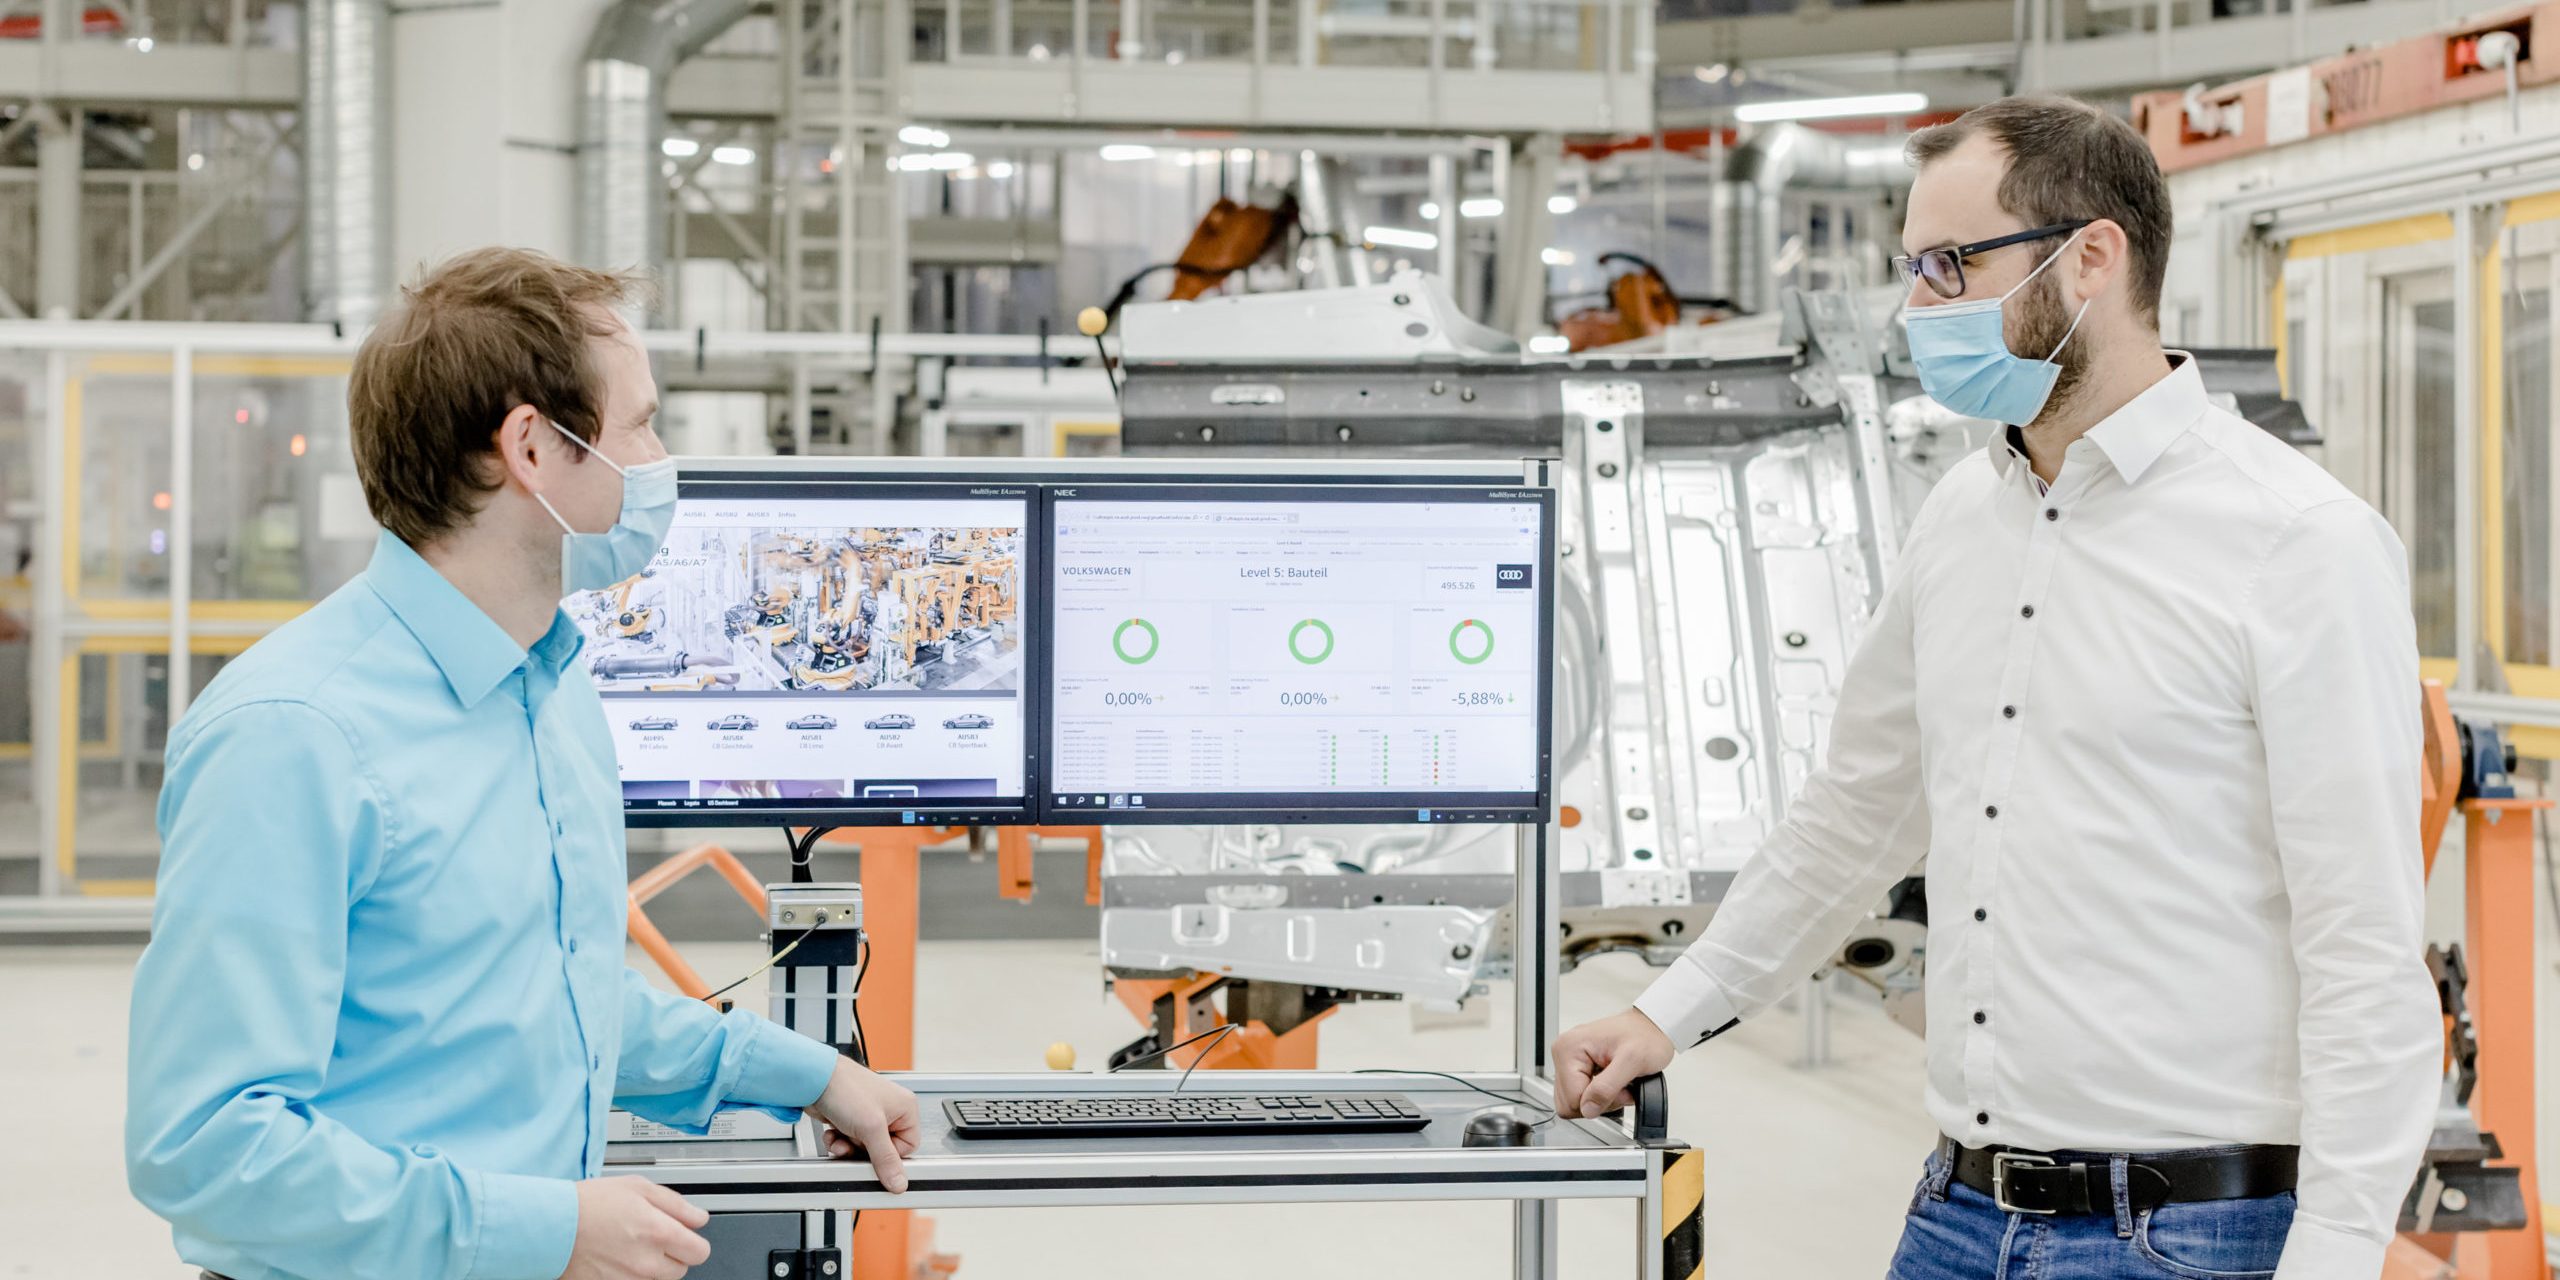 How Audi uses artificial intelligence in production